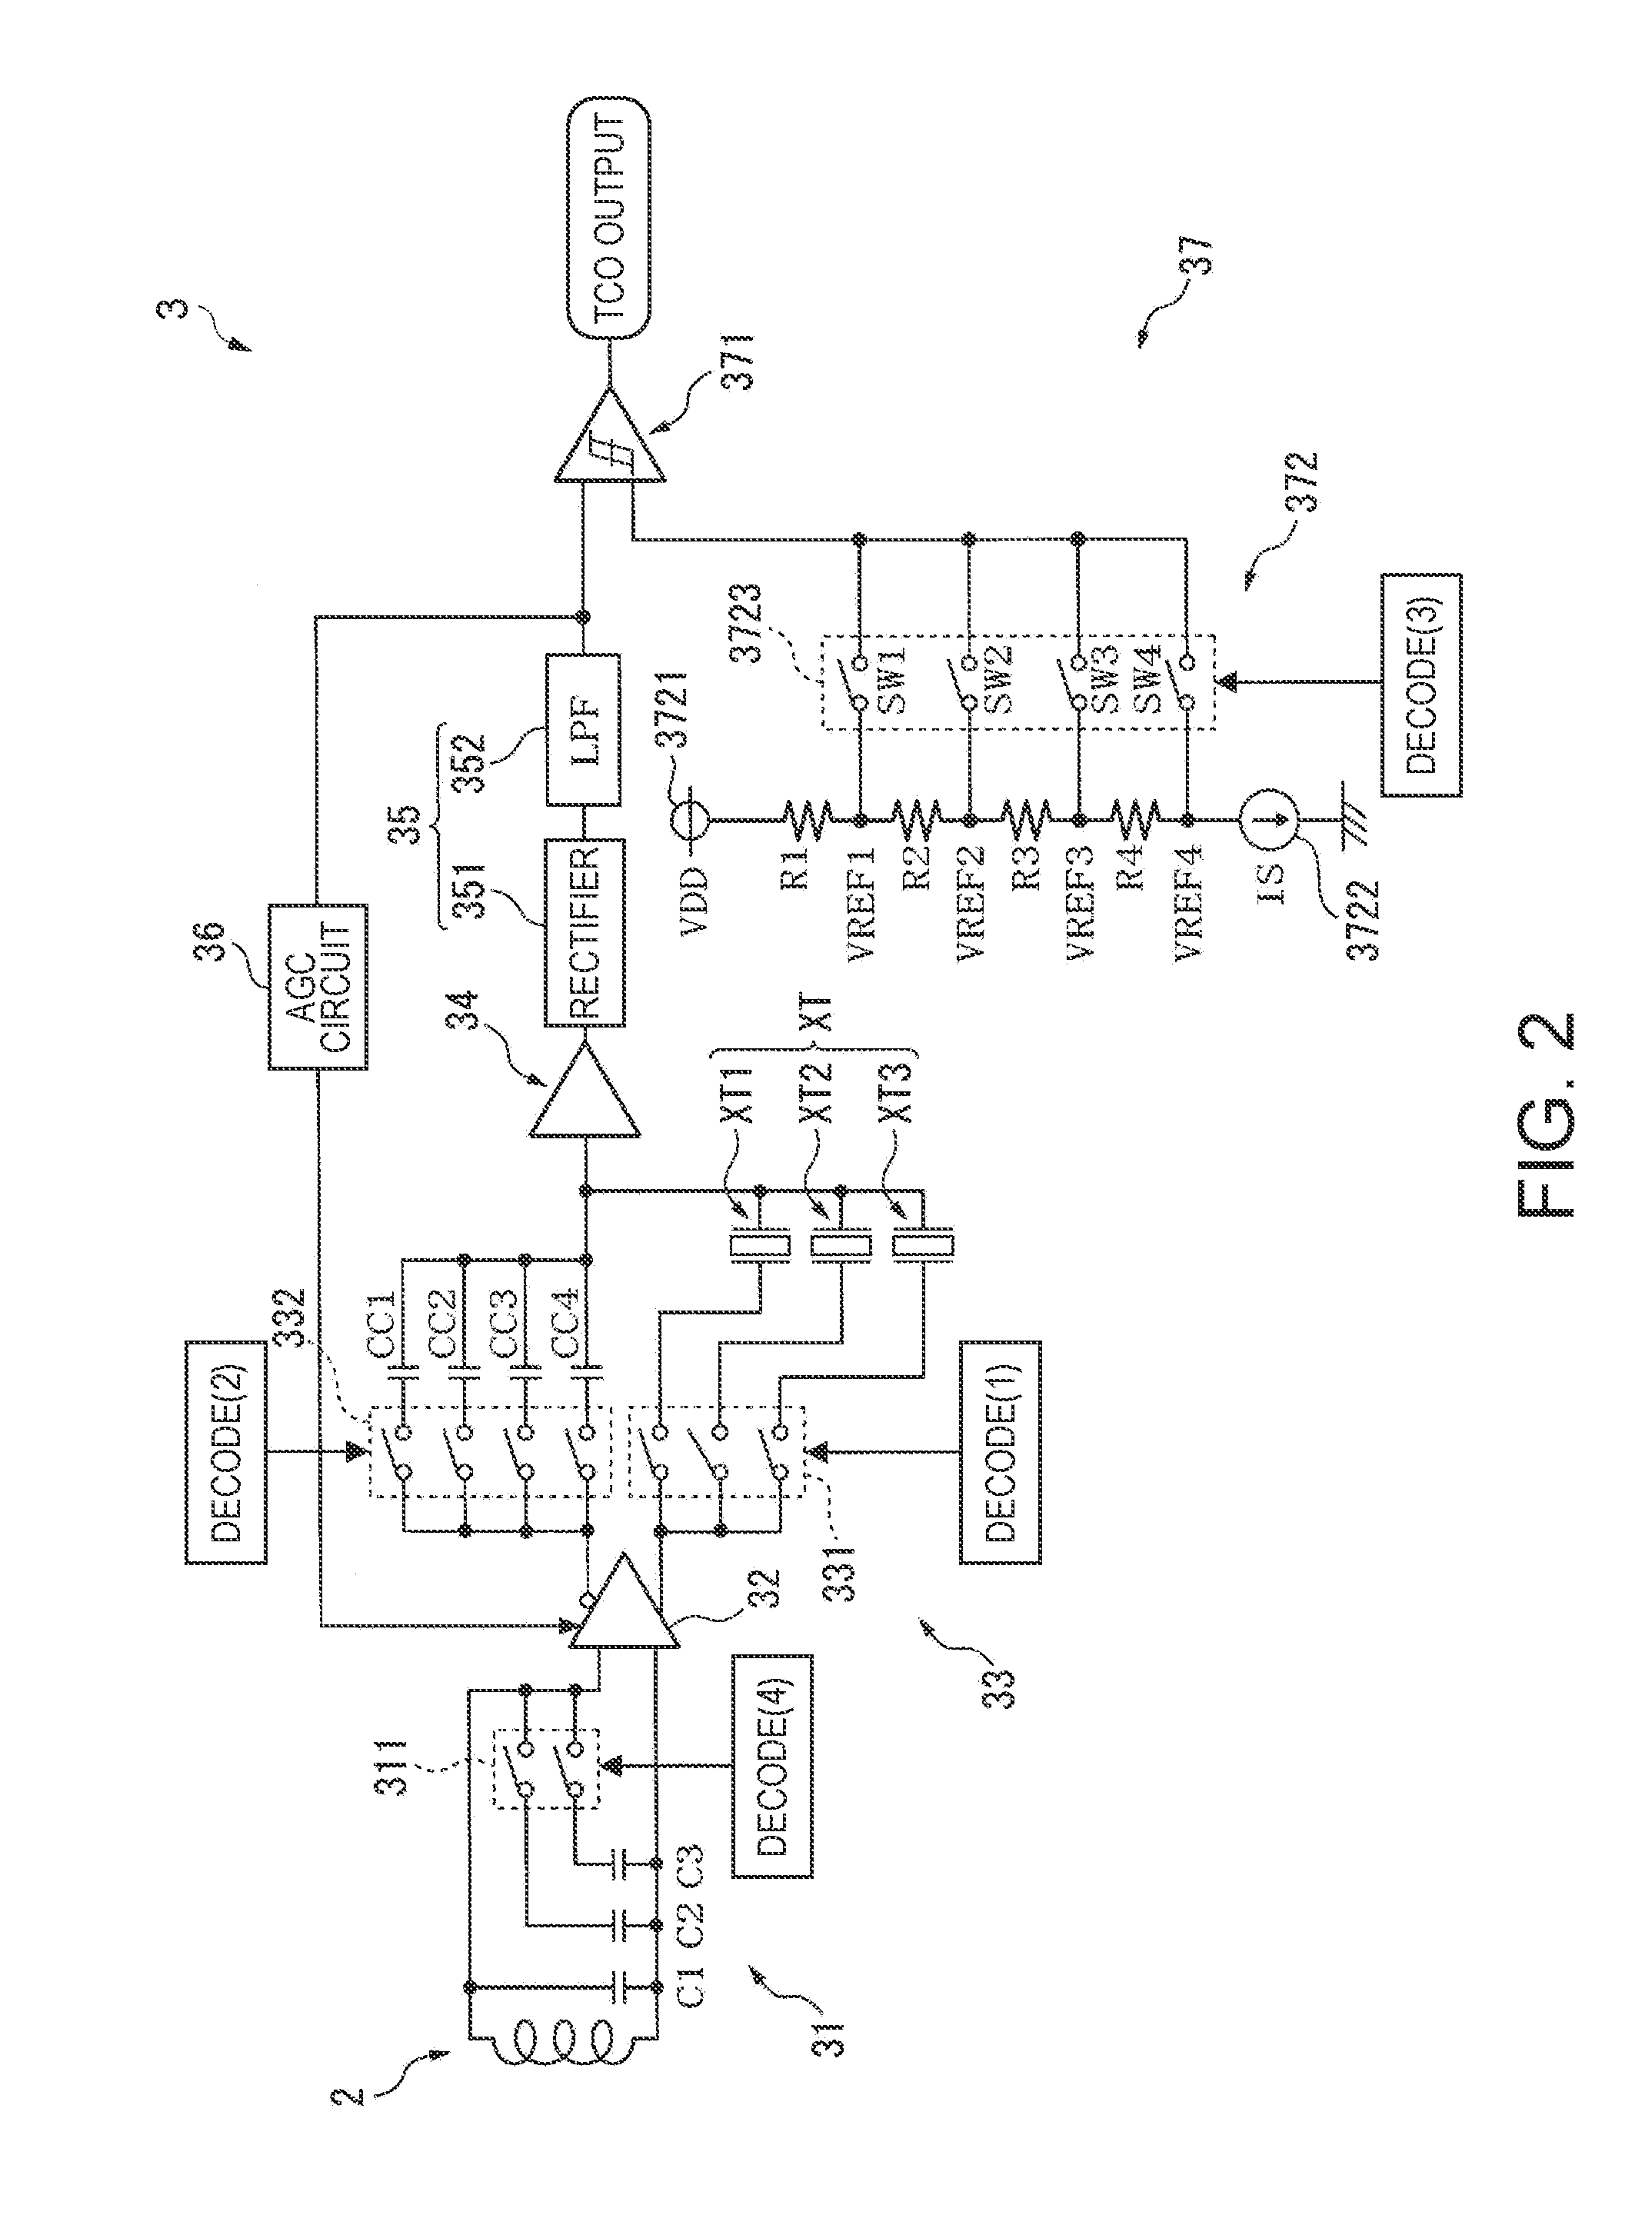 Reception Circuit, Radio-Controlled Timepiece, and Reception Circuit Control Method